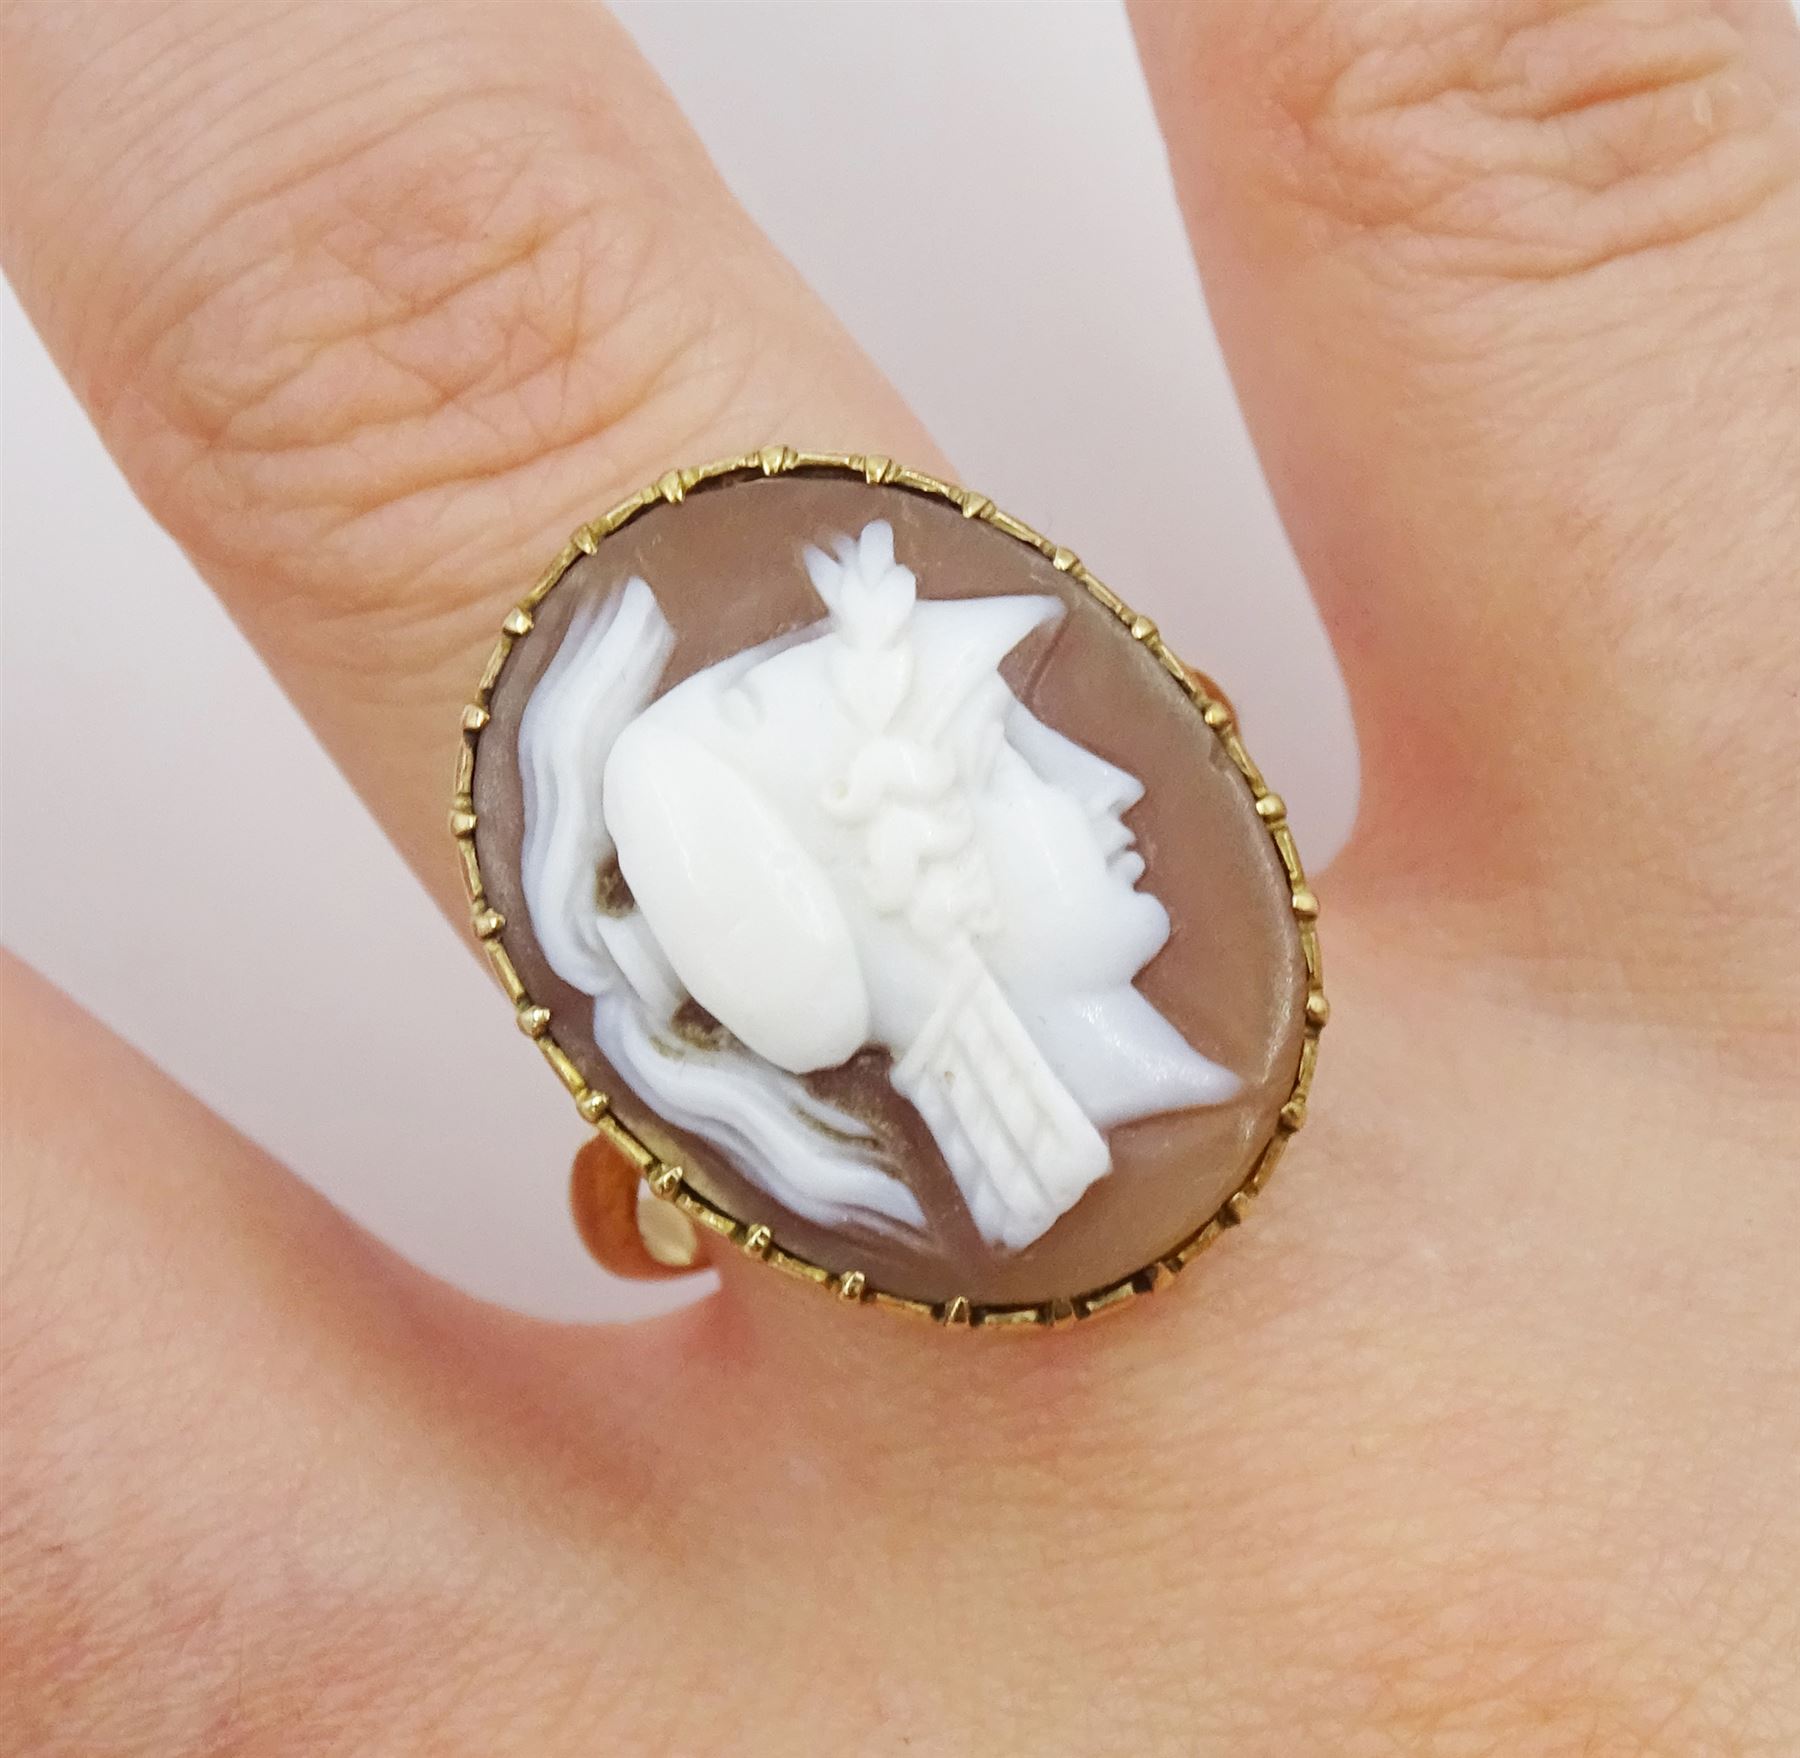 Victorian gold cameo ring depicting the goddess Minerva - Image 2 of 5